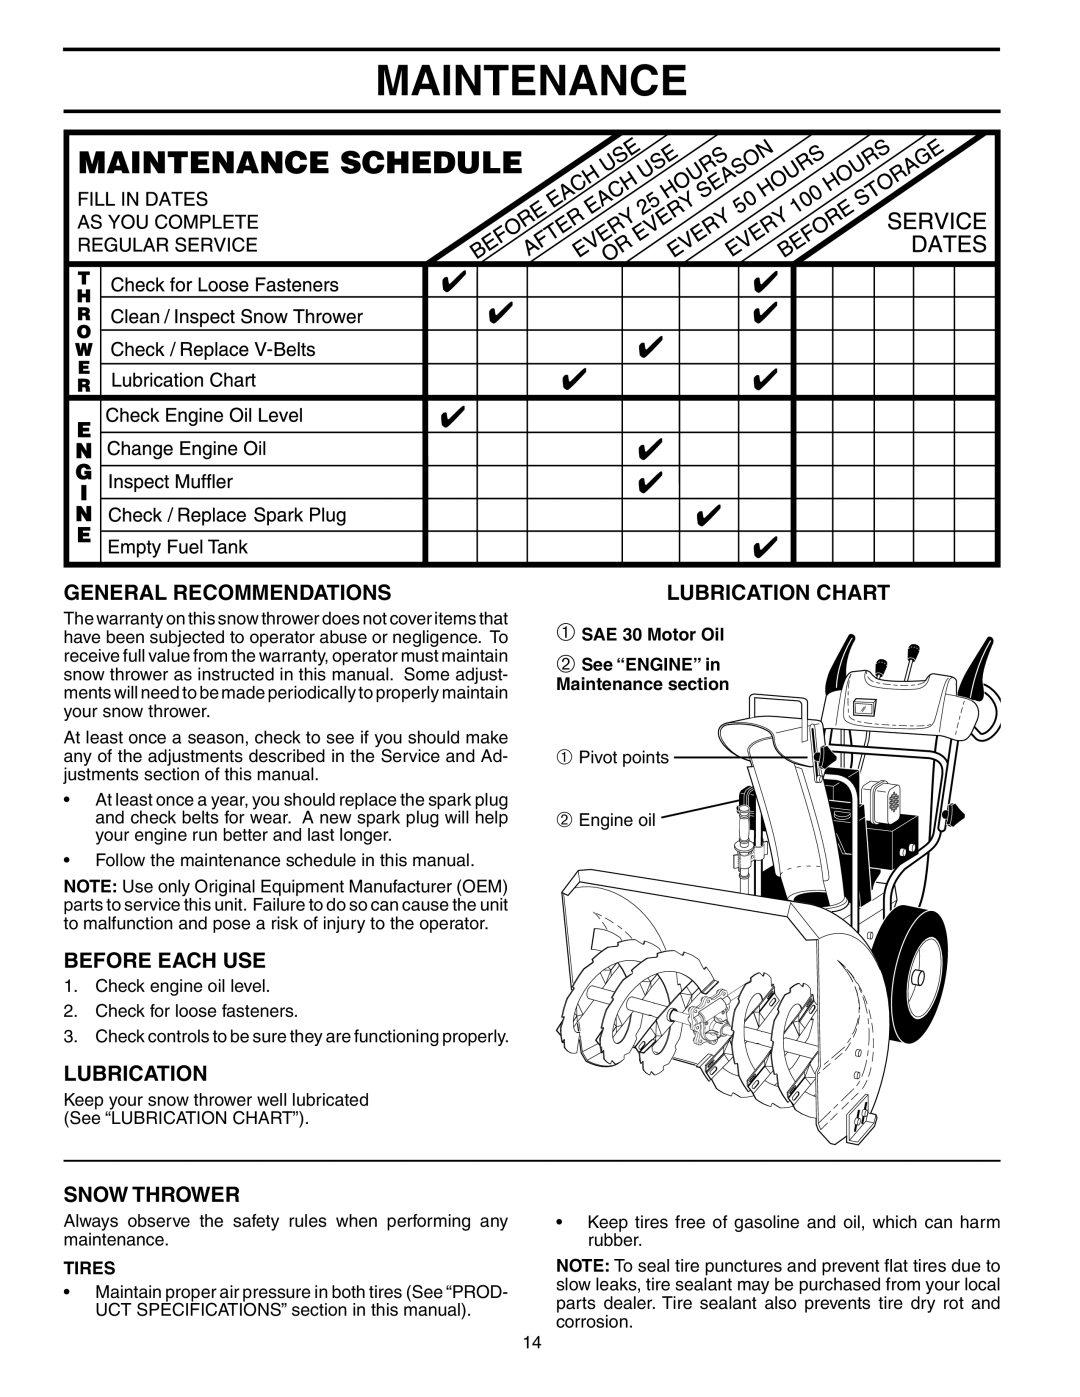 Husqvarna 8524STE Maintenance, General Recommendations, Before Each Use, Snow Thrower, Lubrication Chart, Tires 